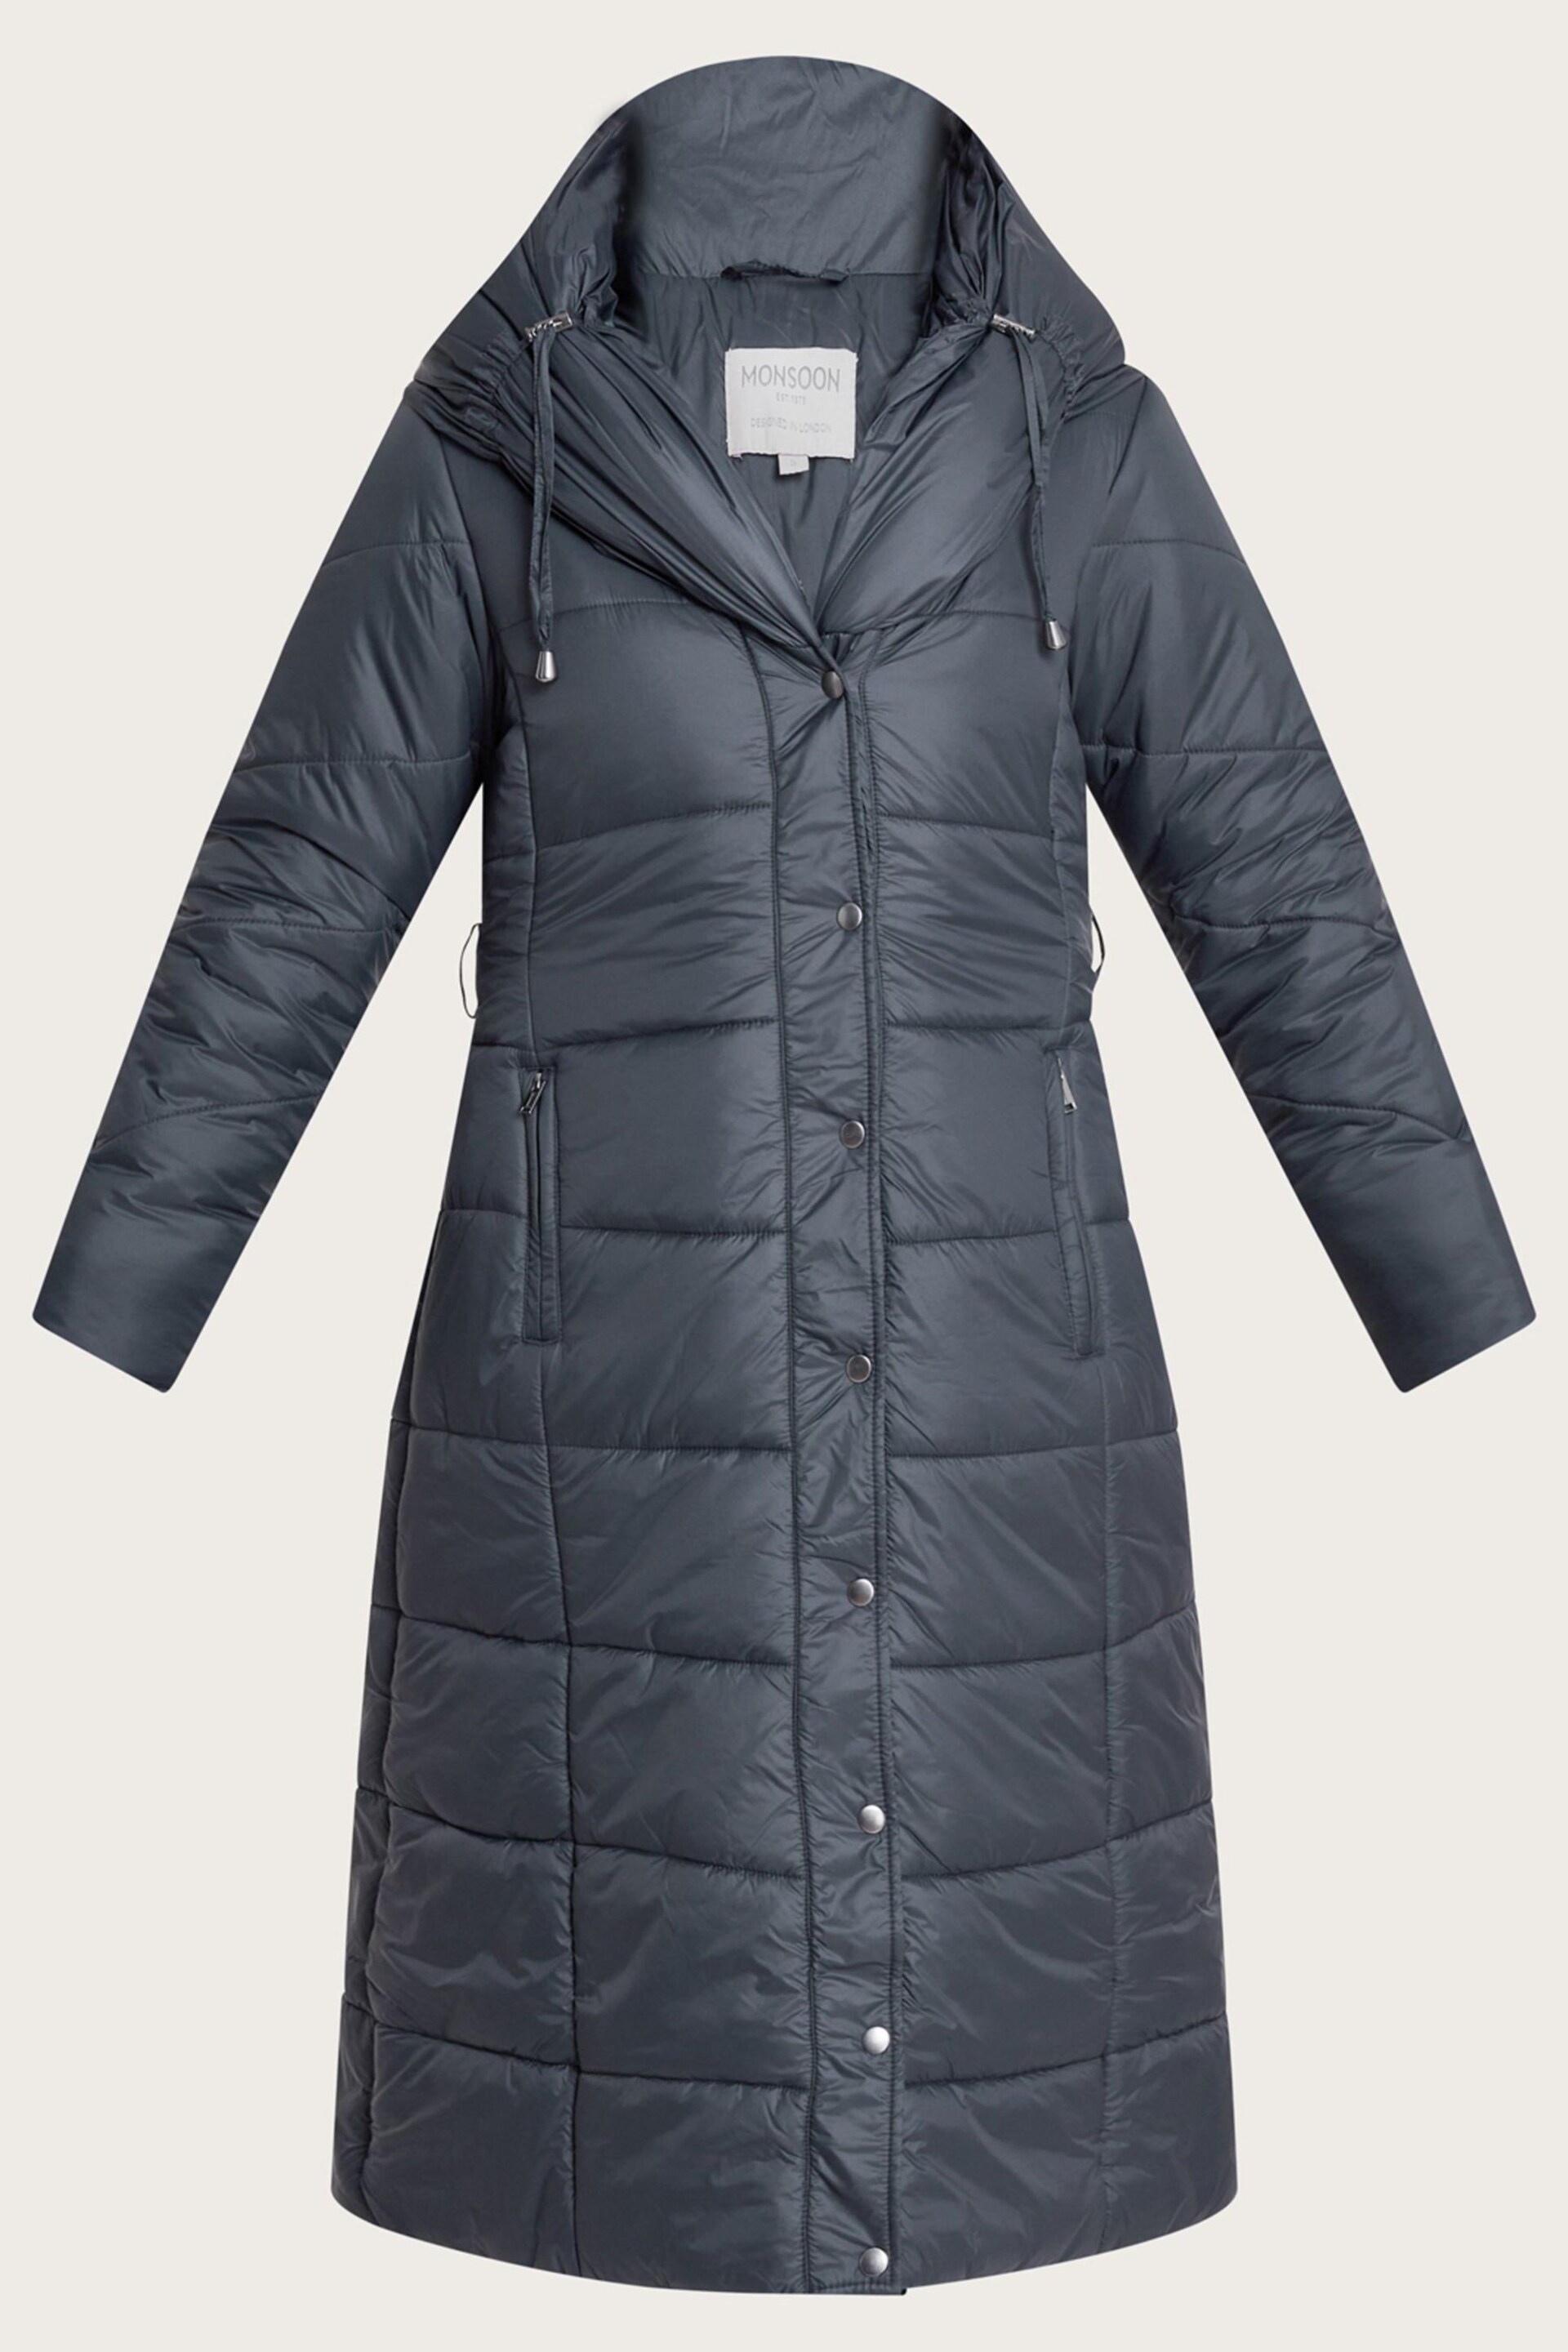 Monsoon Blue Sorena Belted Padded Midi Coat In Polyester - Image 5 of 5